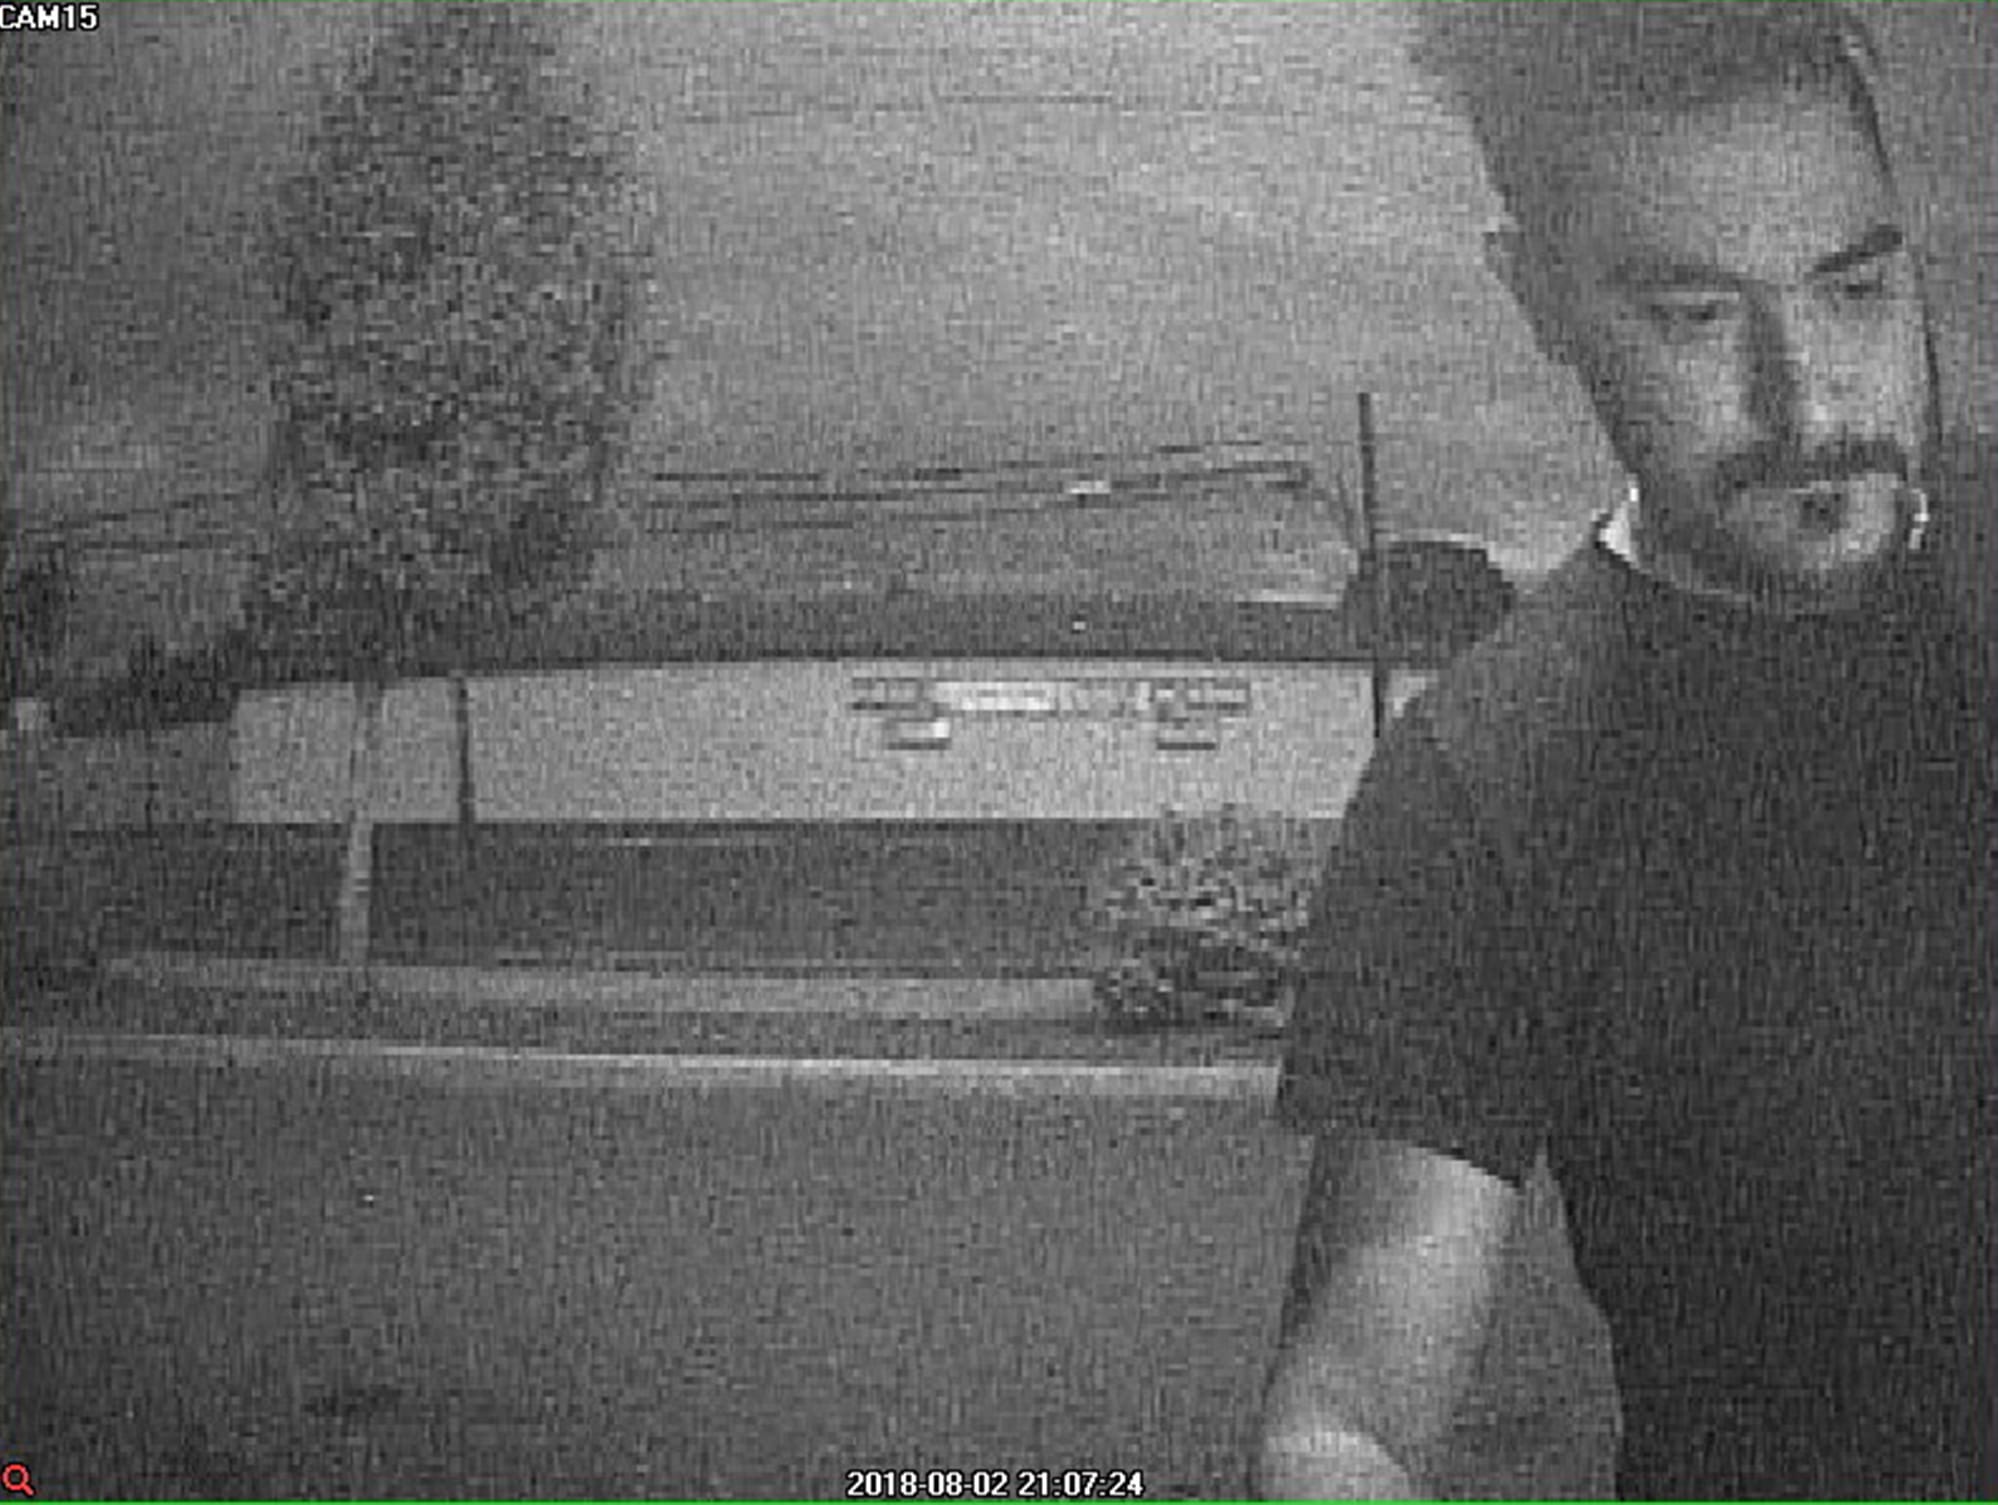 The Woodland Police Department is trying to identify this man, shown in still taken from surveillance video at Fibre Federal Credit Union in Woodland. The man is suspected of tampering with the ATM by fitting it with a skimming device used to steal bank card information.